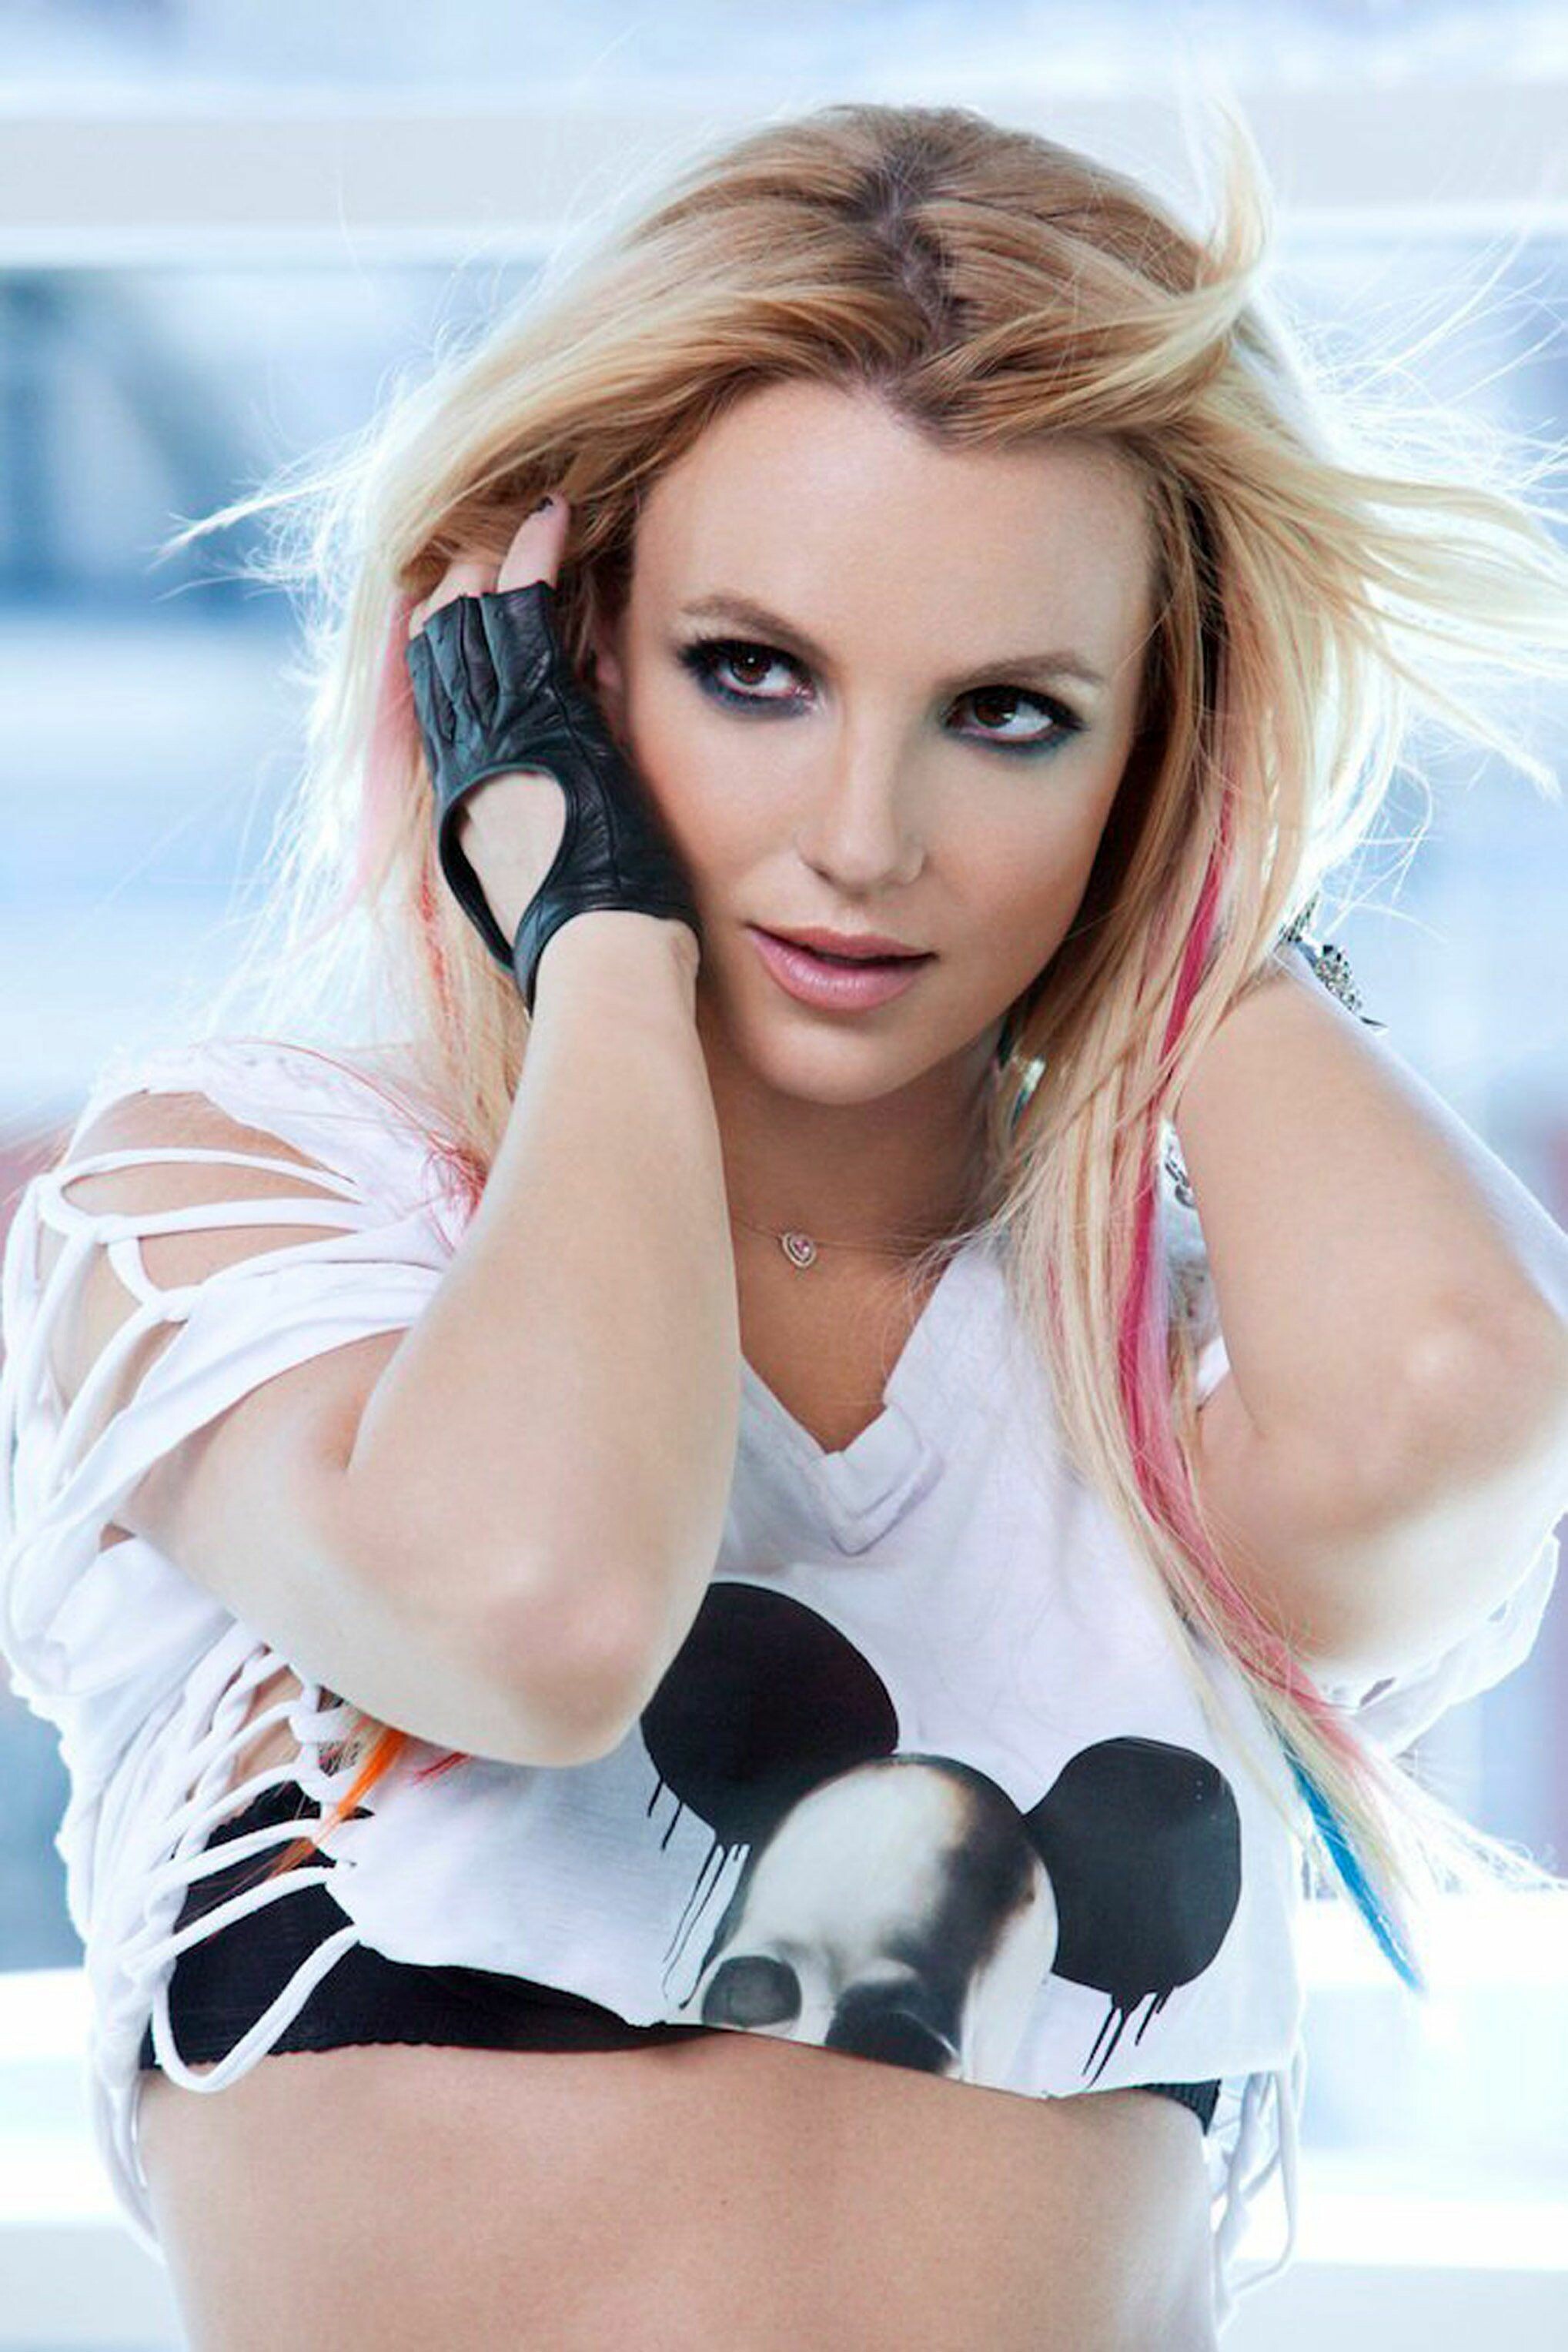 Britney Spears: Albums Britney (2001) and In the Zone (2003), Known for provocative style. 2040x3060 HD Wallpaper.